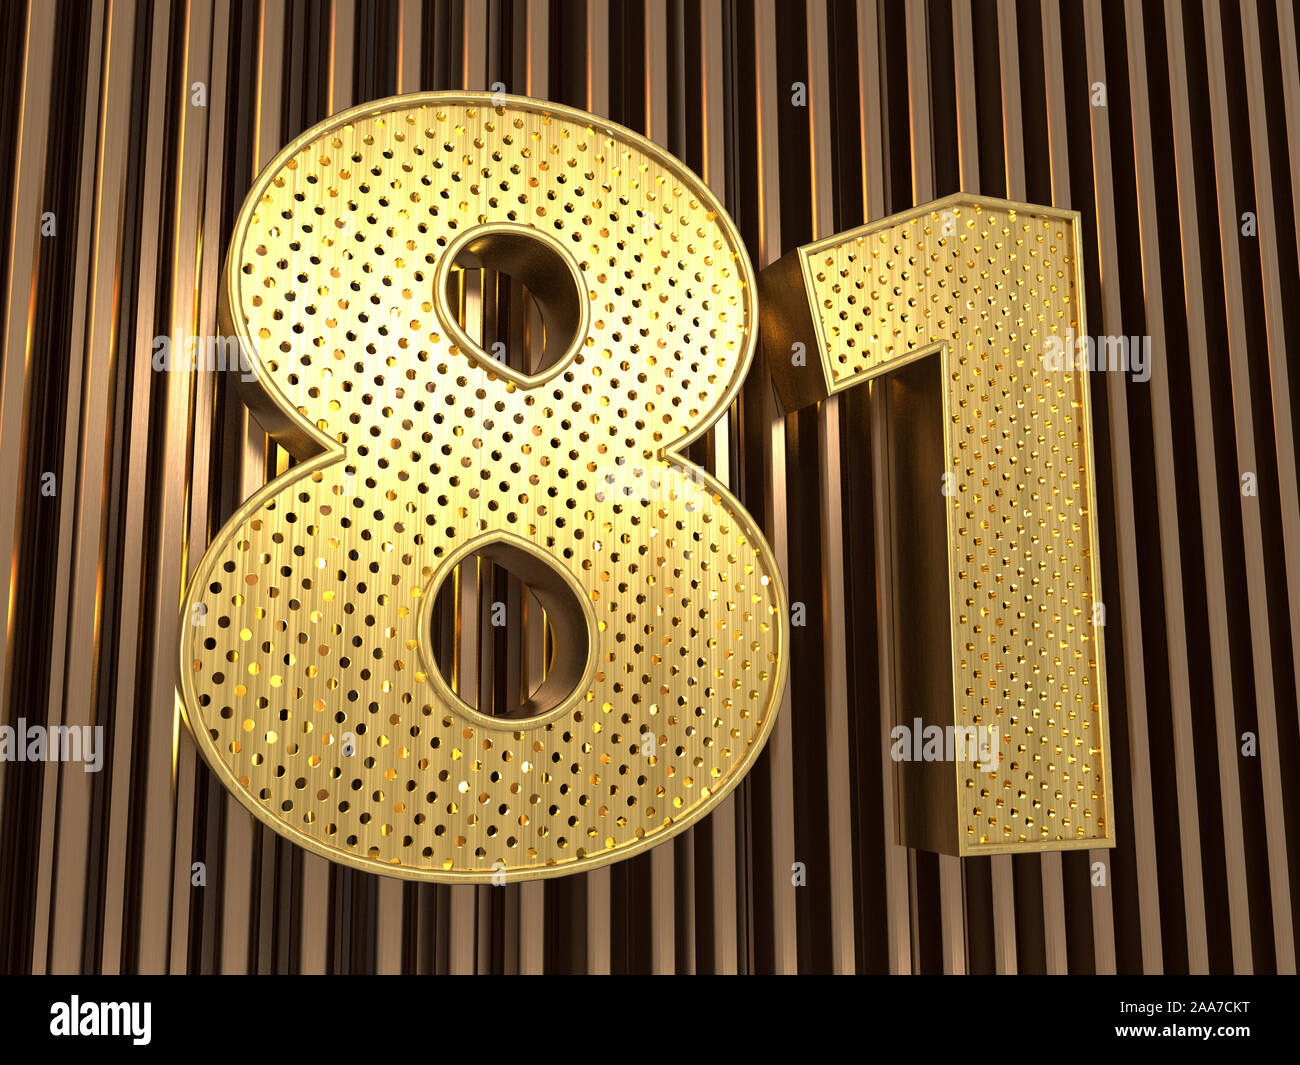 number 81 (number eighty-one) perforated with small holes on the metal background. 3D illustration Stock Photo